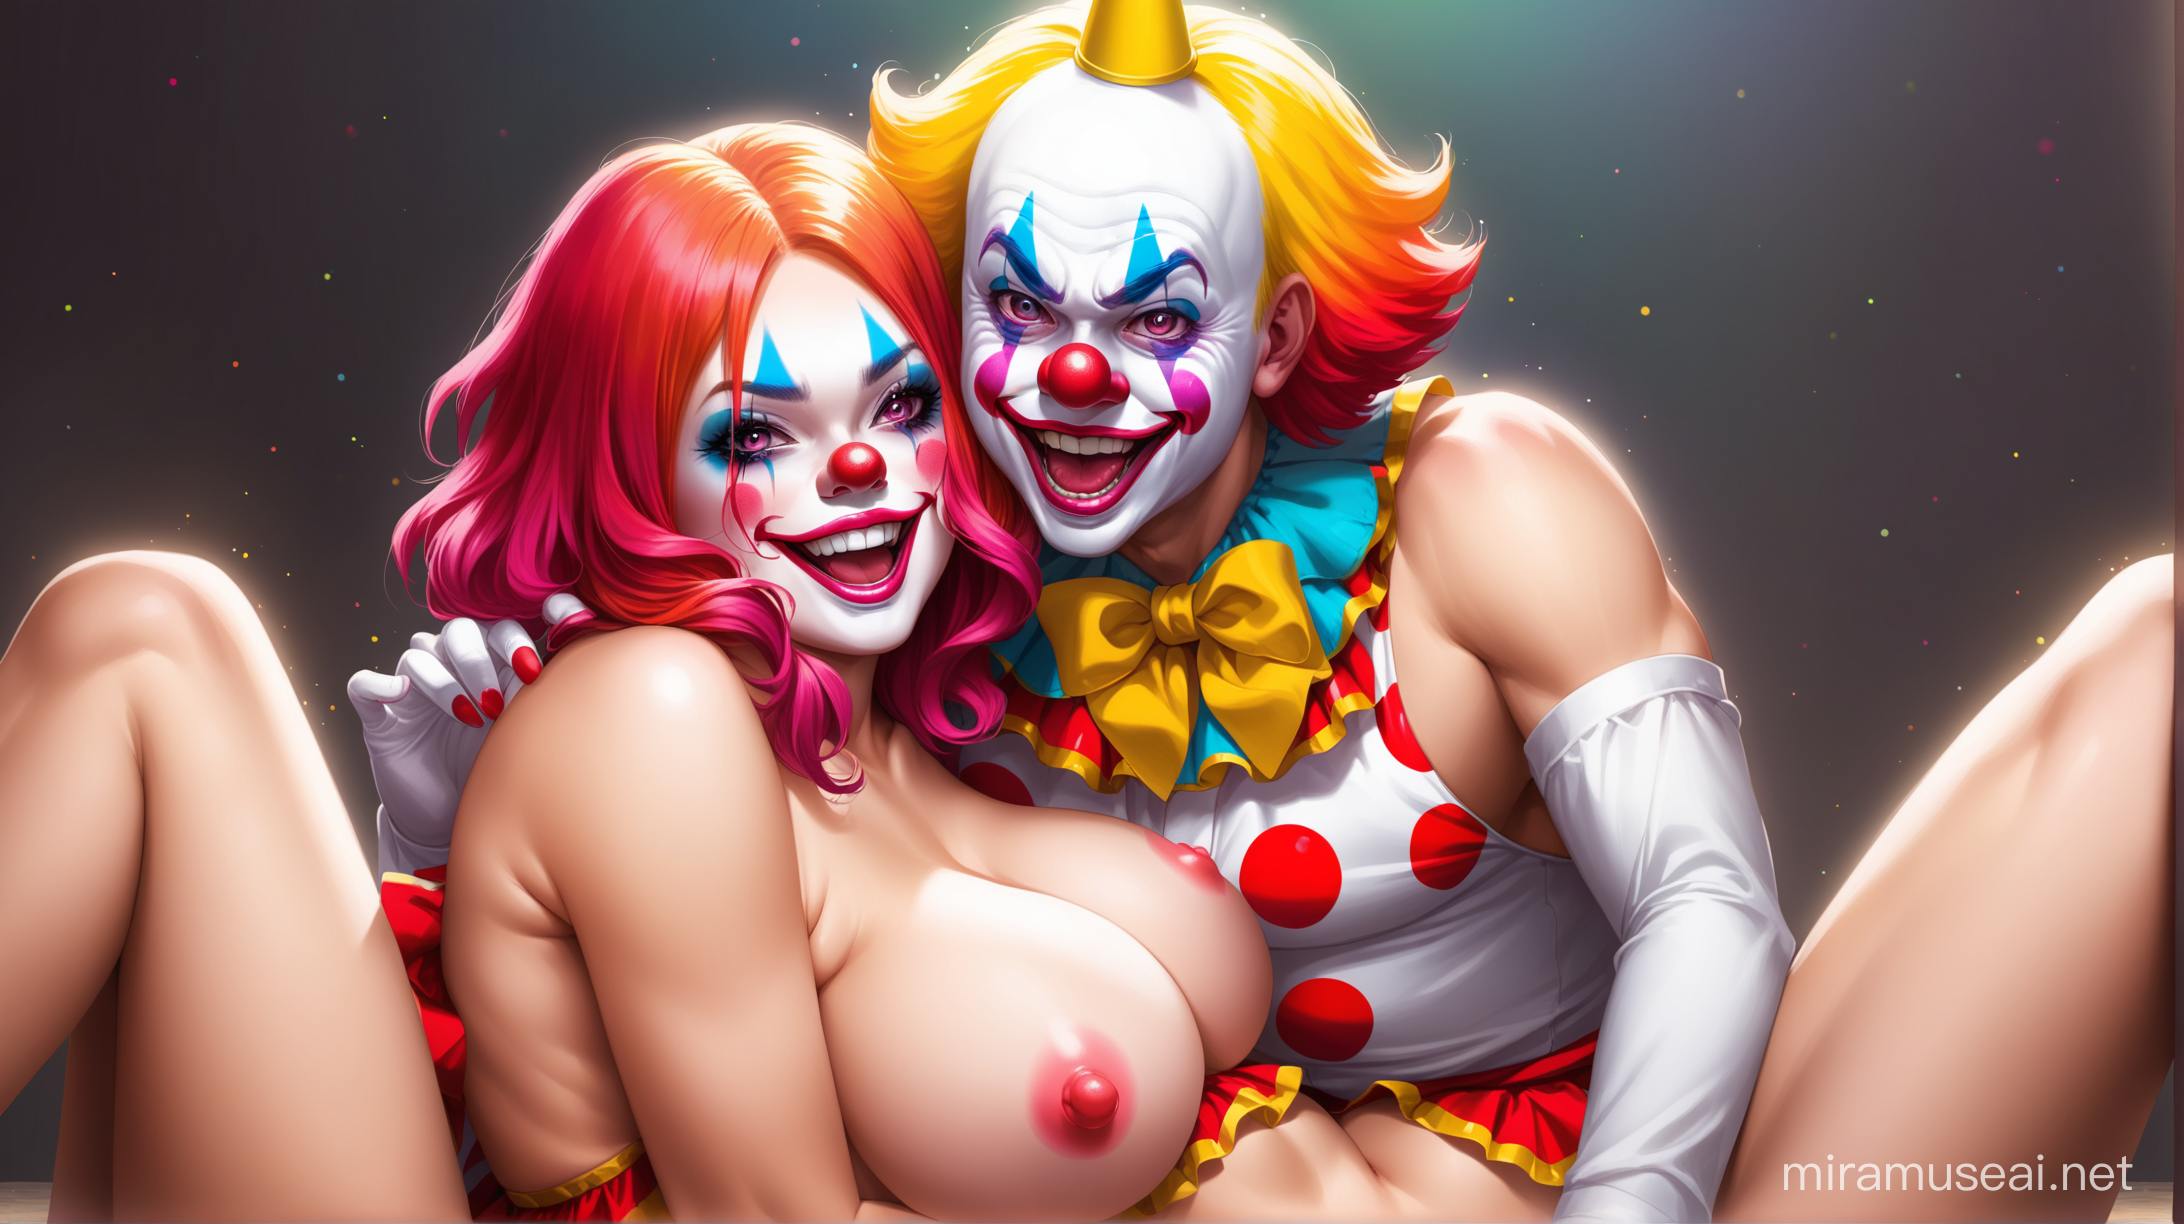 Colorful Clowns Engaging in Playful Activities